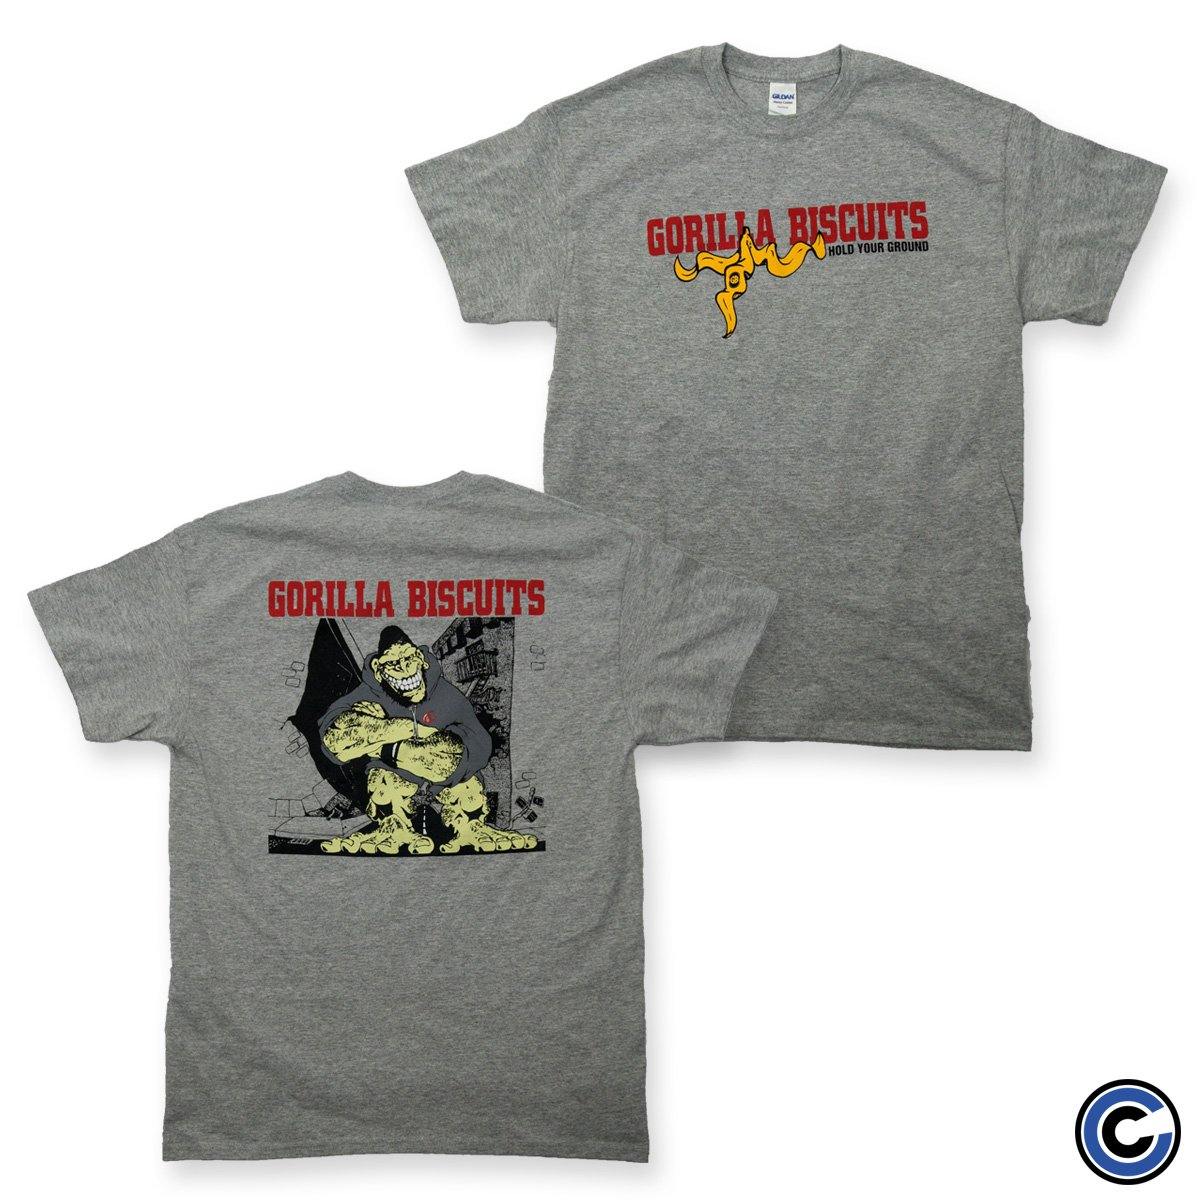 Gorilla Biscuits Hold Your Ground Shirt - Grey / Small